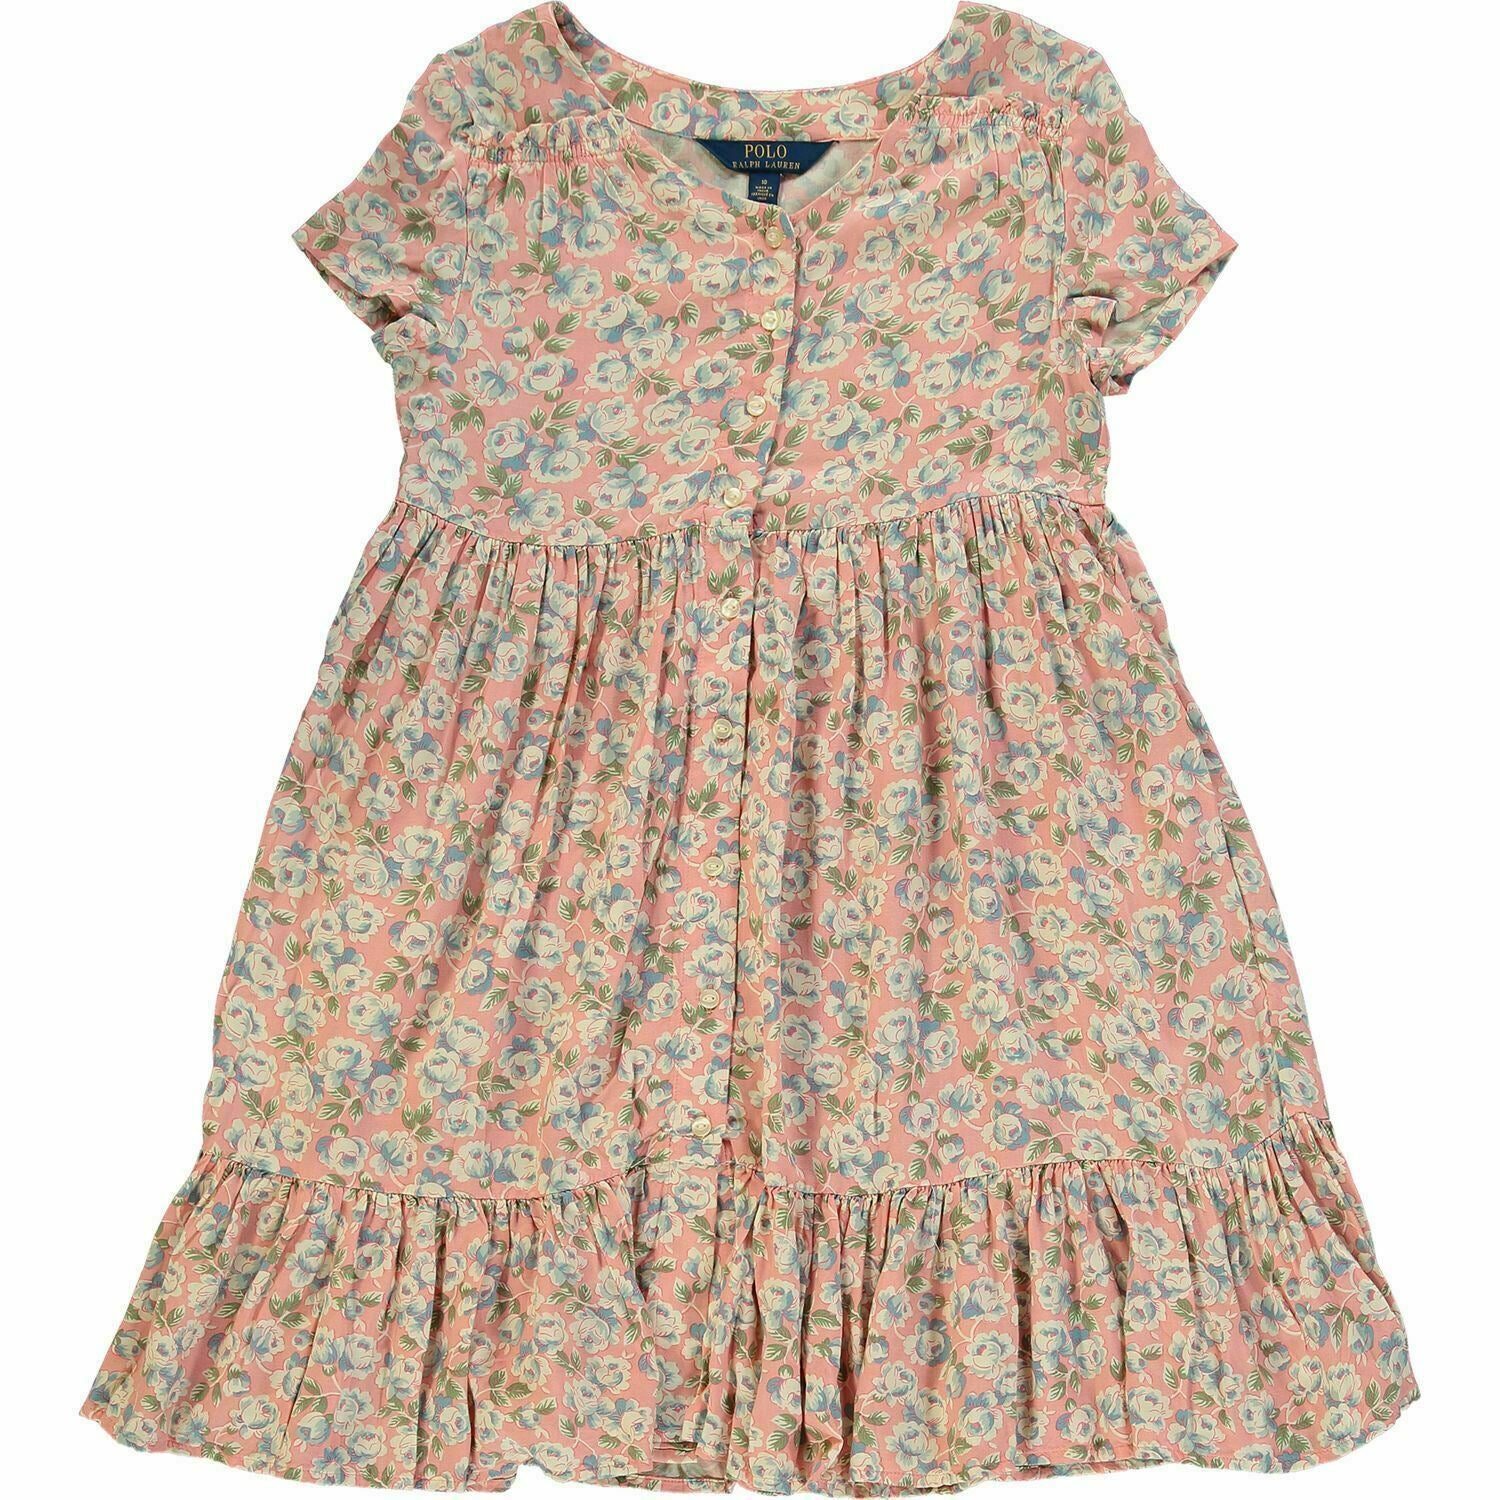 POLO RALPH LAUREN Girls' Rose Pink & Floral Day Dress, size 10 years